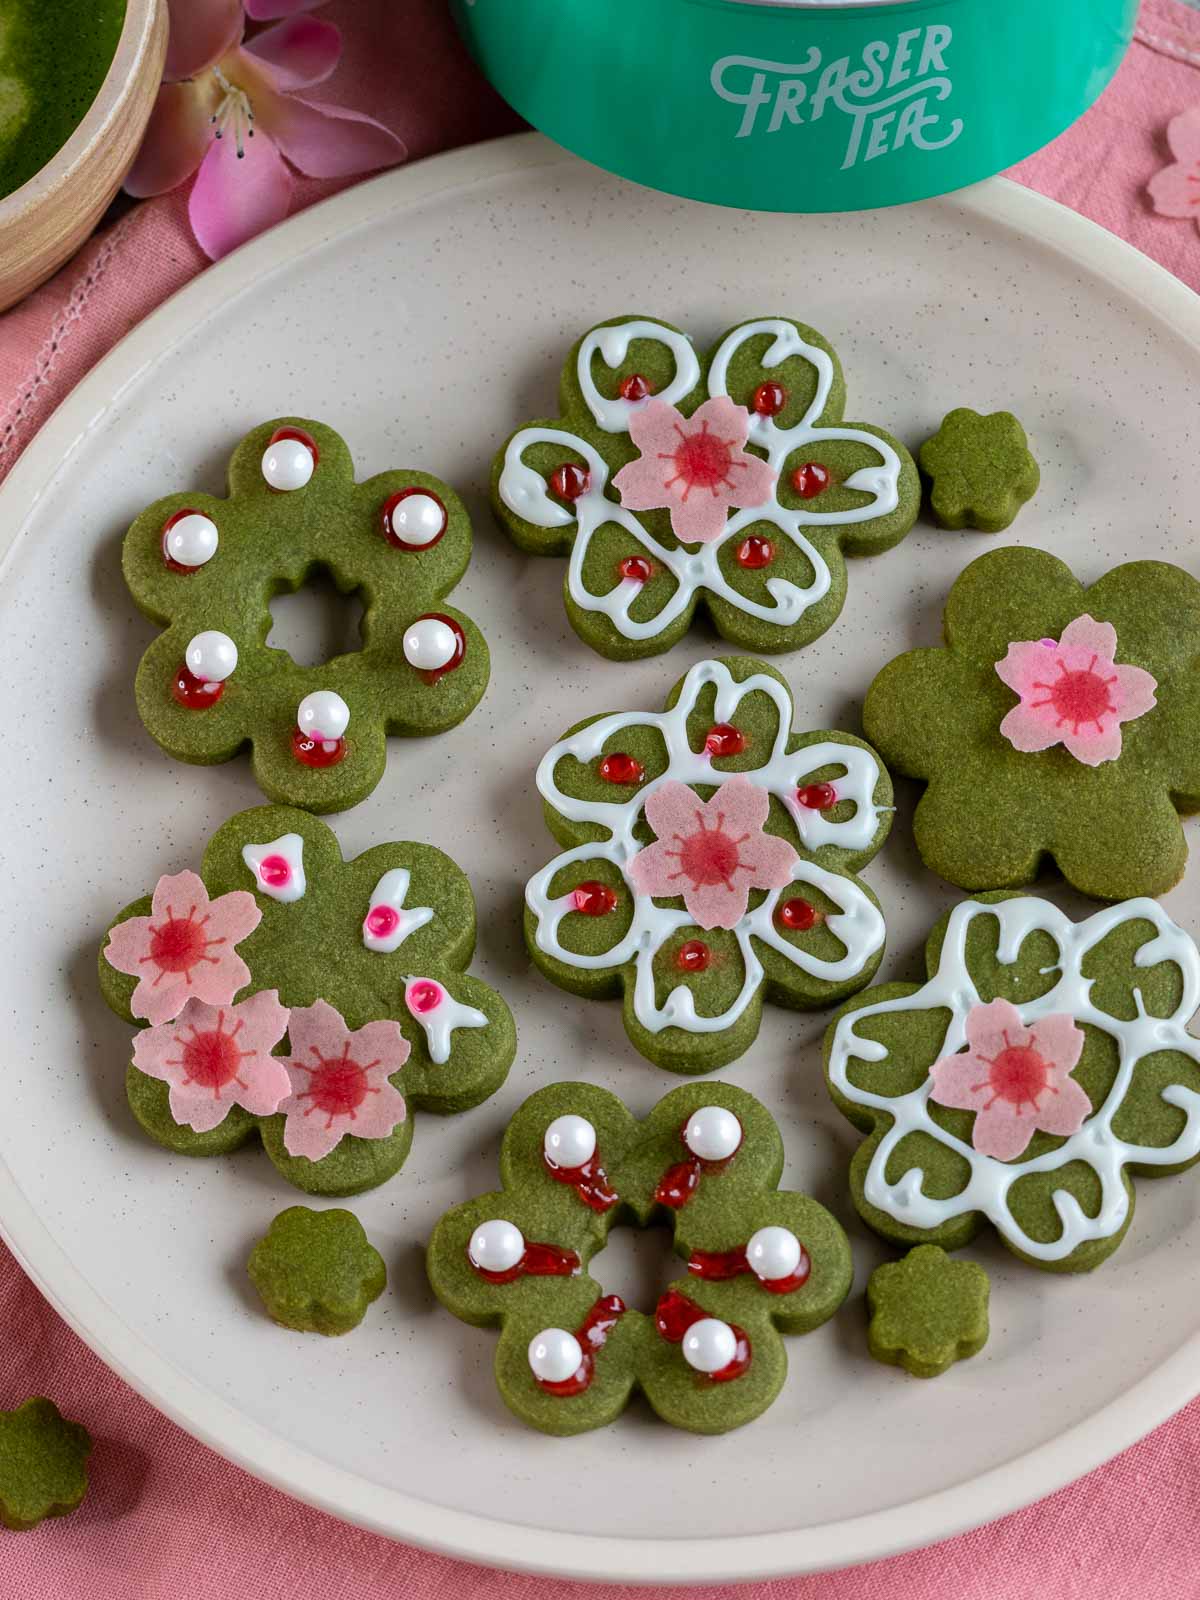 Decorated matcha cookies on a white plate with super cute cherry blossom edible decorations.